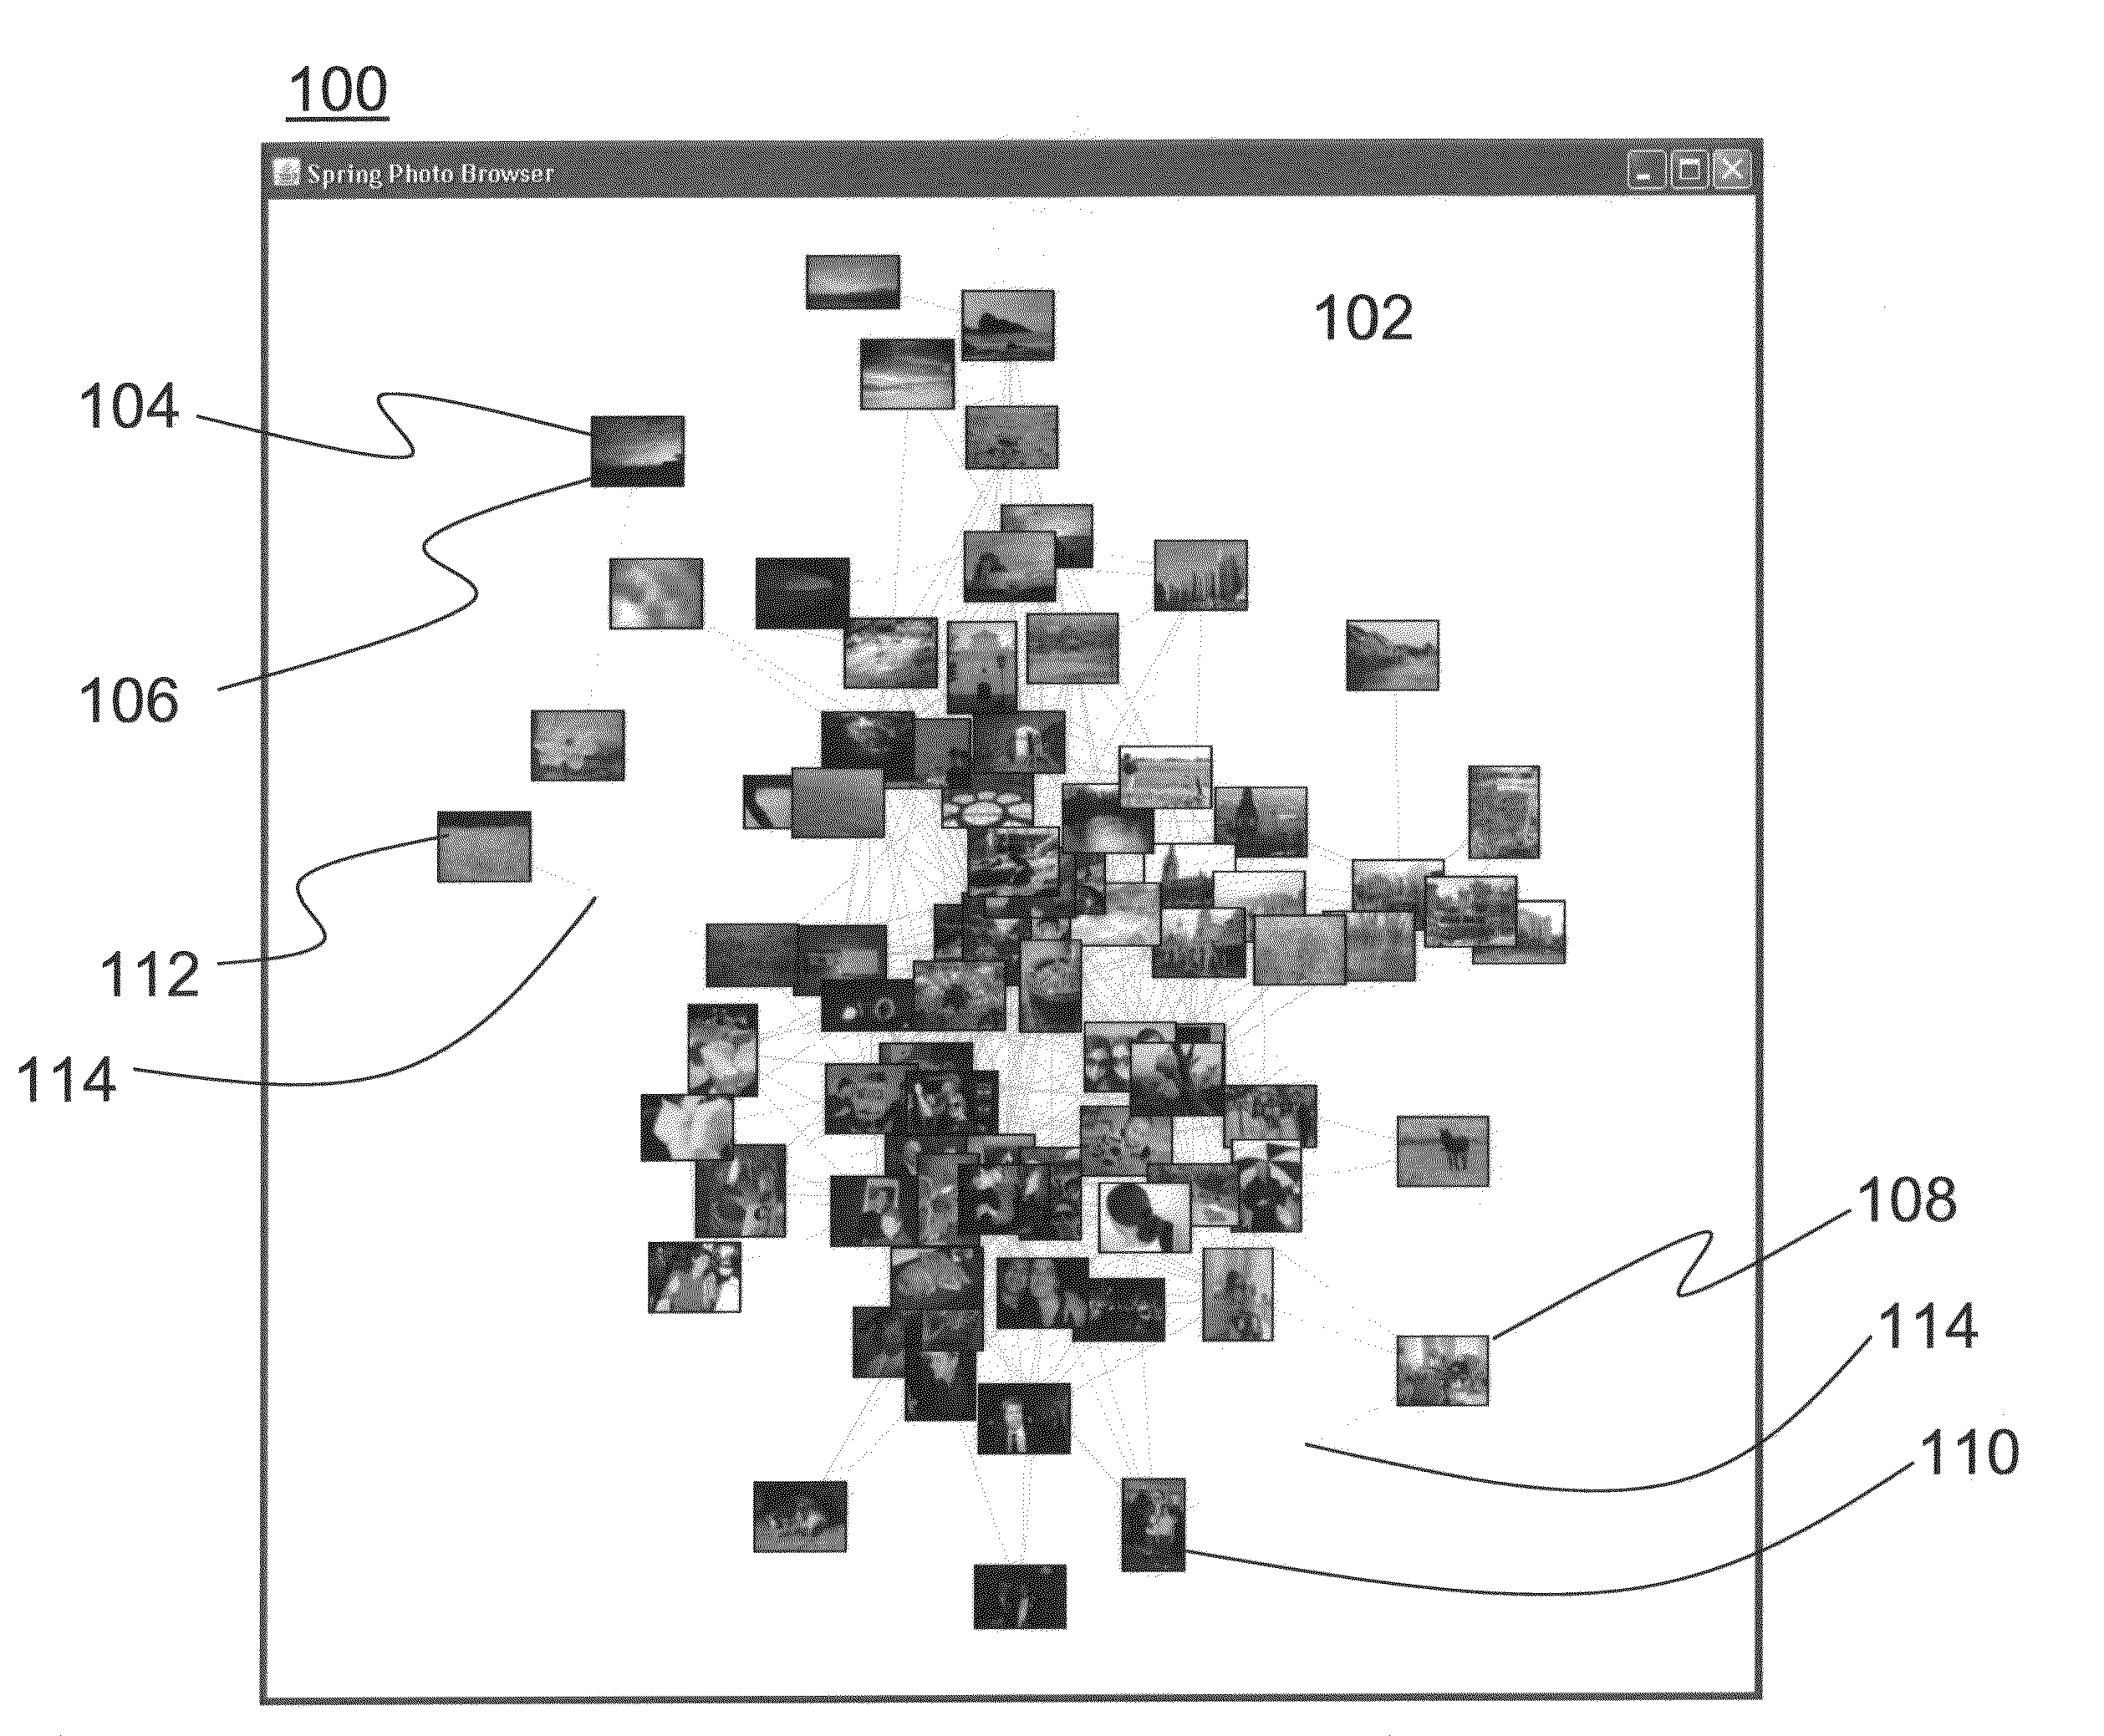 Systems and methods for organizing files in a graph-based layout